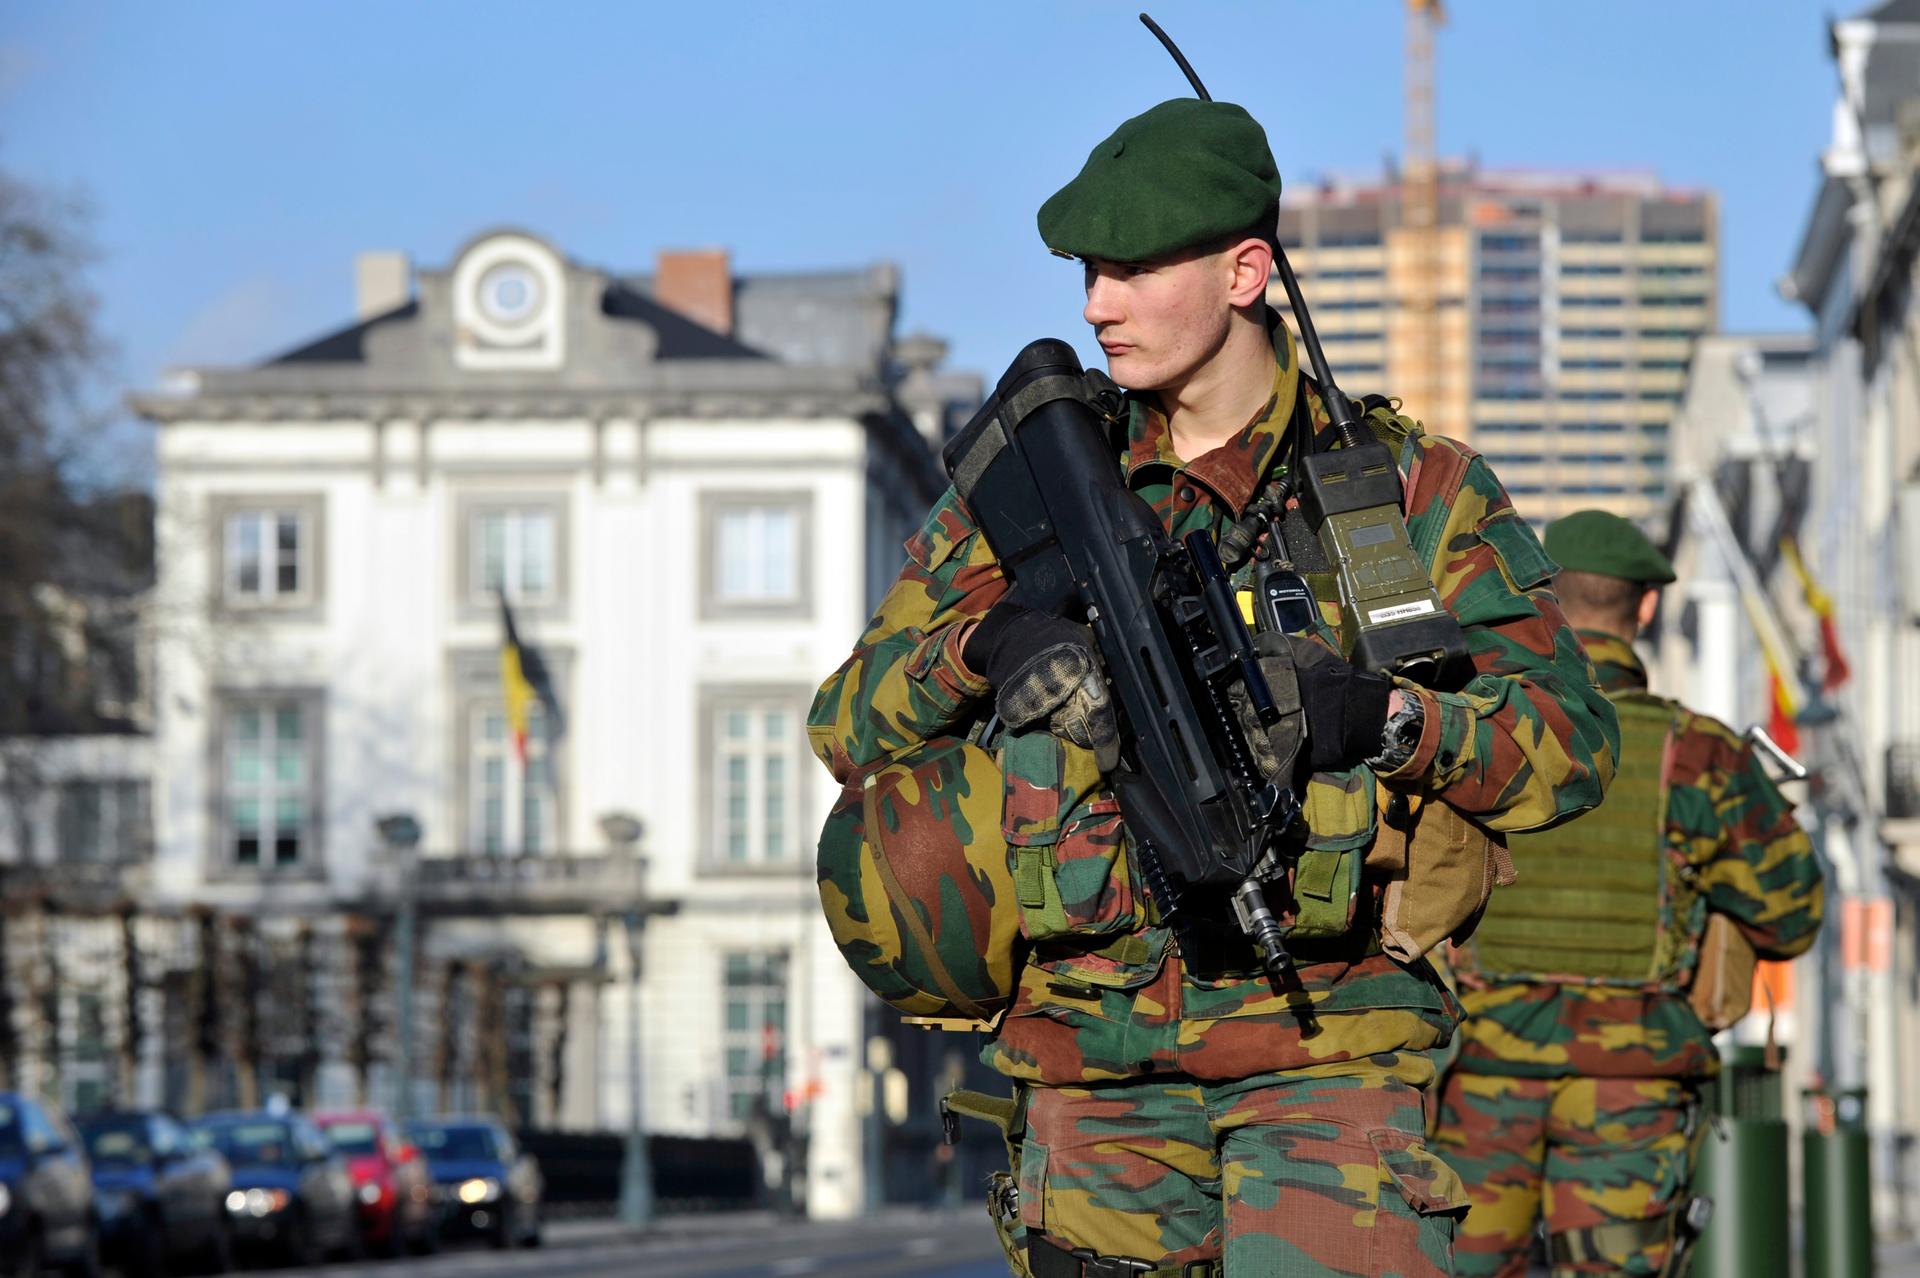 Belgian soldiers patrolling outside the US Embassy in Brussels, near the Belgian Parliament. Belgium has deployed hundreds of troops to guard potential targets of terrorism, including Jewish sites and diplomatic missions.